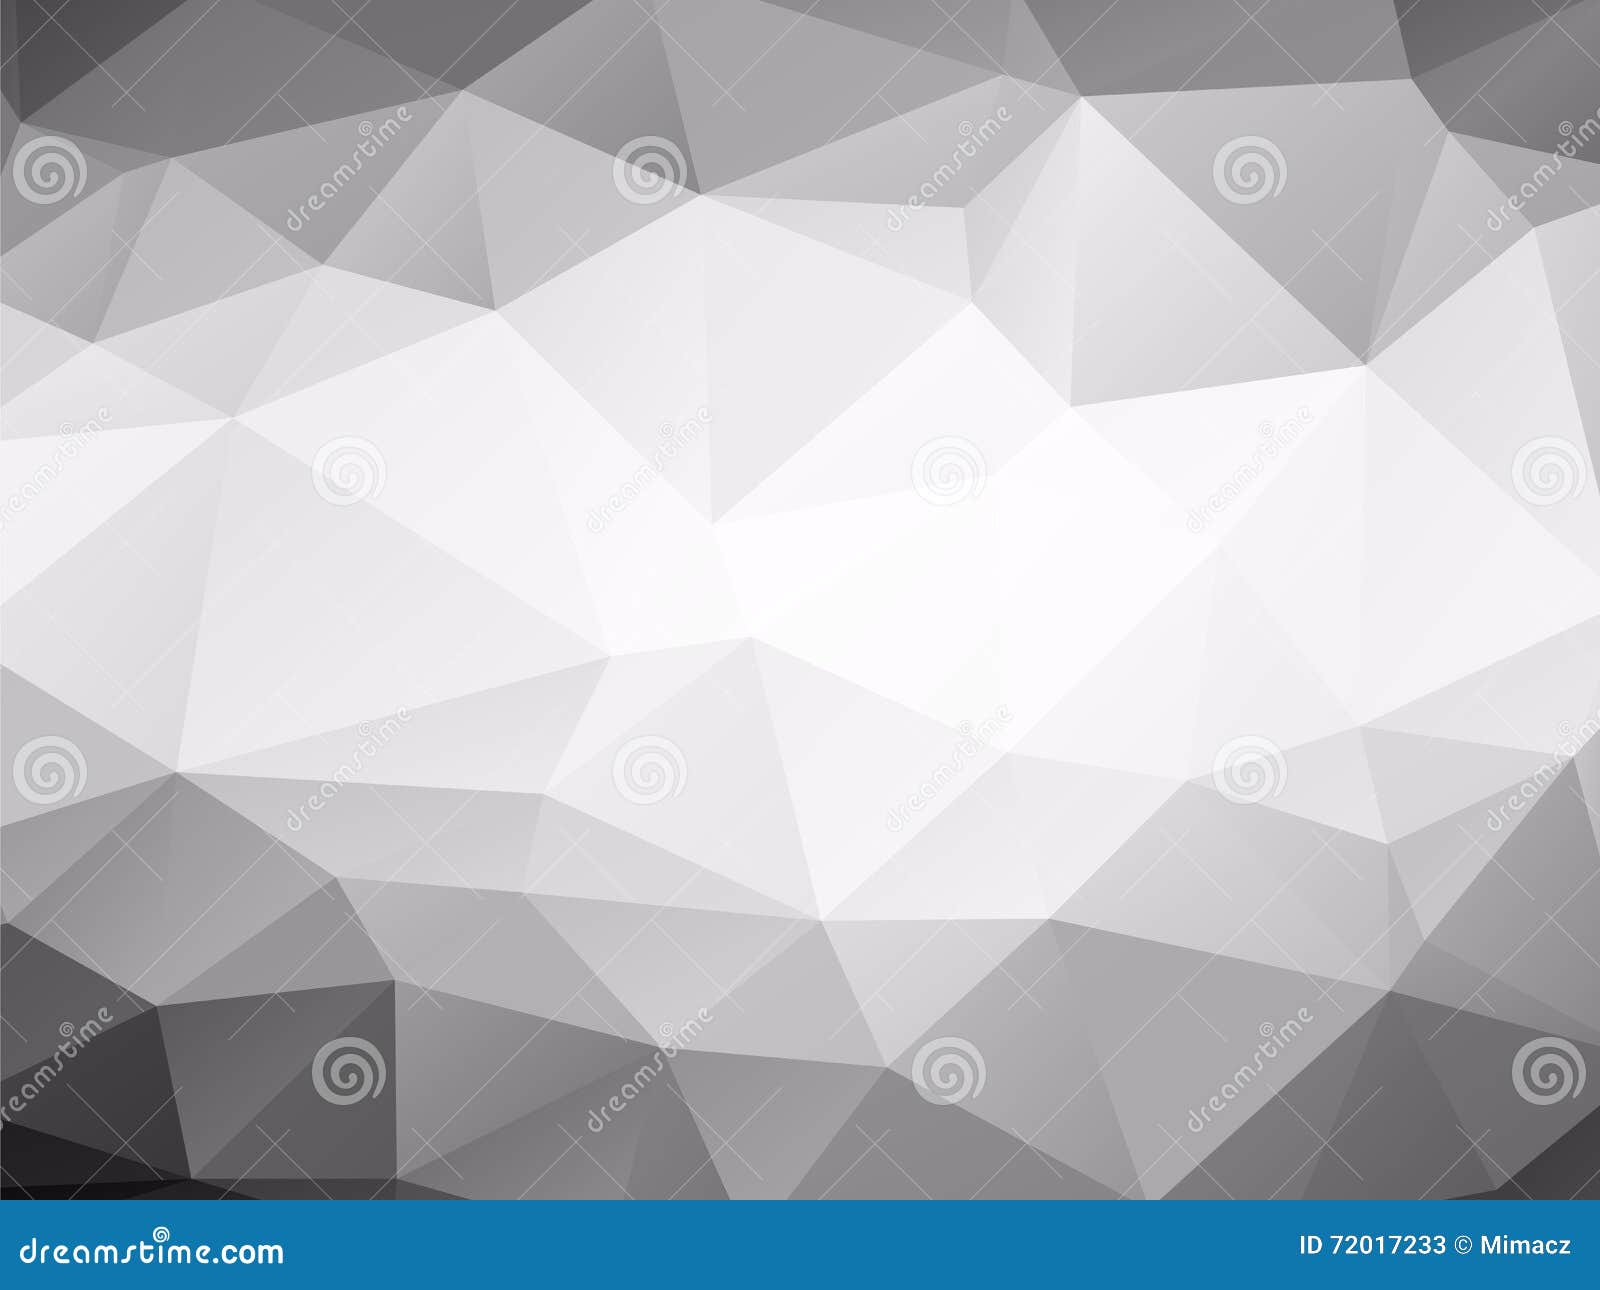 Triangles Background Black And White Stock Vector - Illustration of